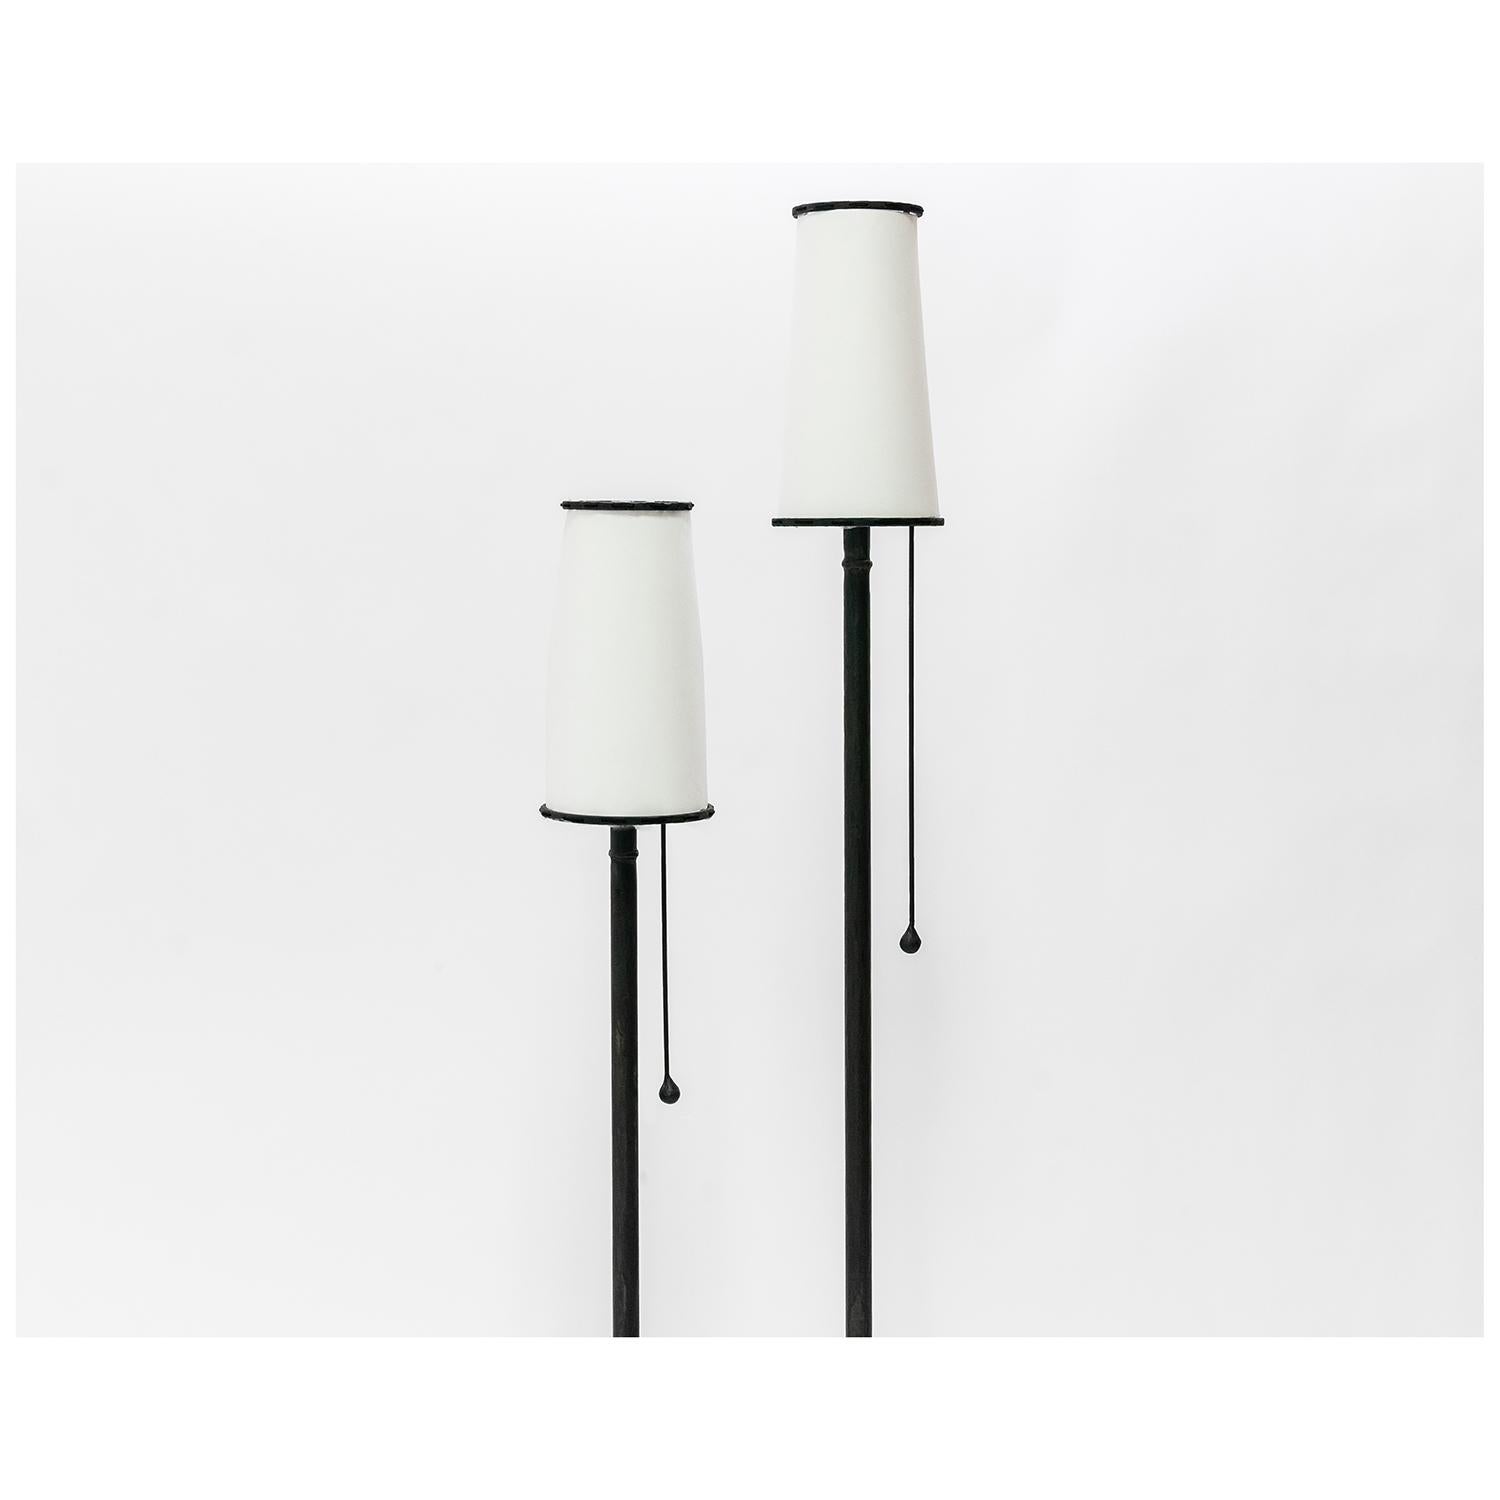 LAMP NO. 2 
J.M. Szymanski
d. 2020

This special floor lamp features a linen shade and a carved steel base.  A single tear drop pull is used to operate the lamp. 

Custom sizes available. Made in the Bronx, New York, USA.

Our products are